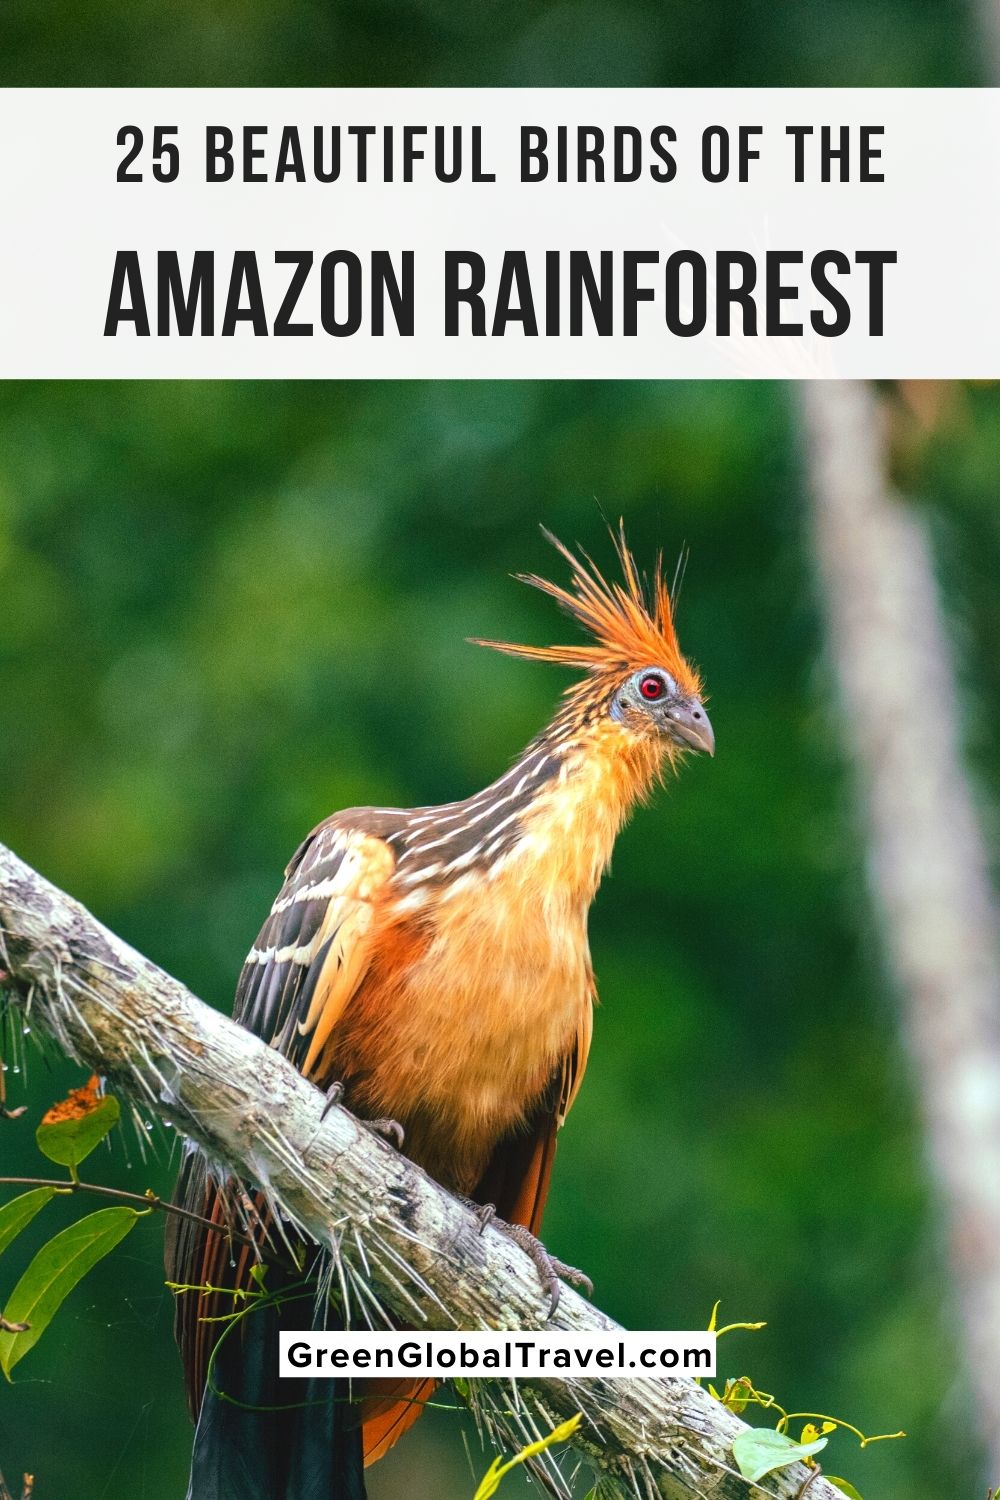 25 beautiful birds in the Amazon Rainforest that you may be able to spot during a Peruvian Amazon river cruise. | birds in the amazon | amazon birds | birds in the rainforest | rainforest birds | amazon rainforest birds | birds of the amazon rainforest | birds in tropical rainforest | amazon forest birds | birds that live in the rainforest